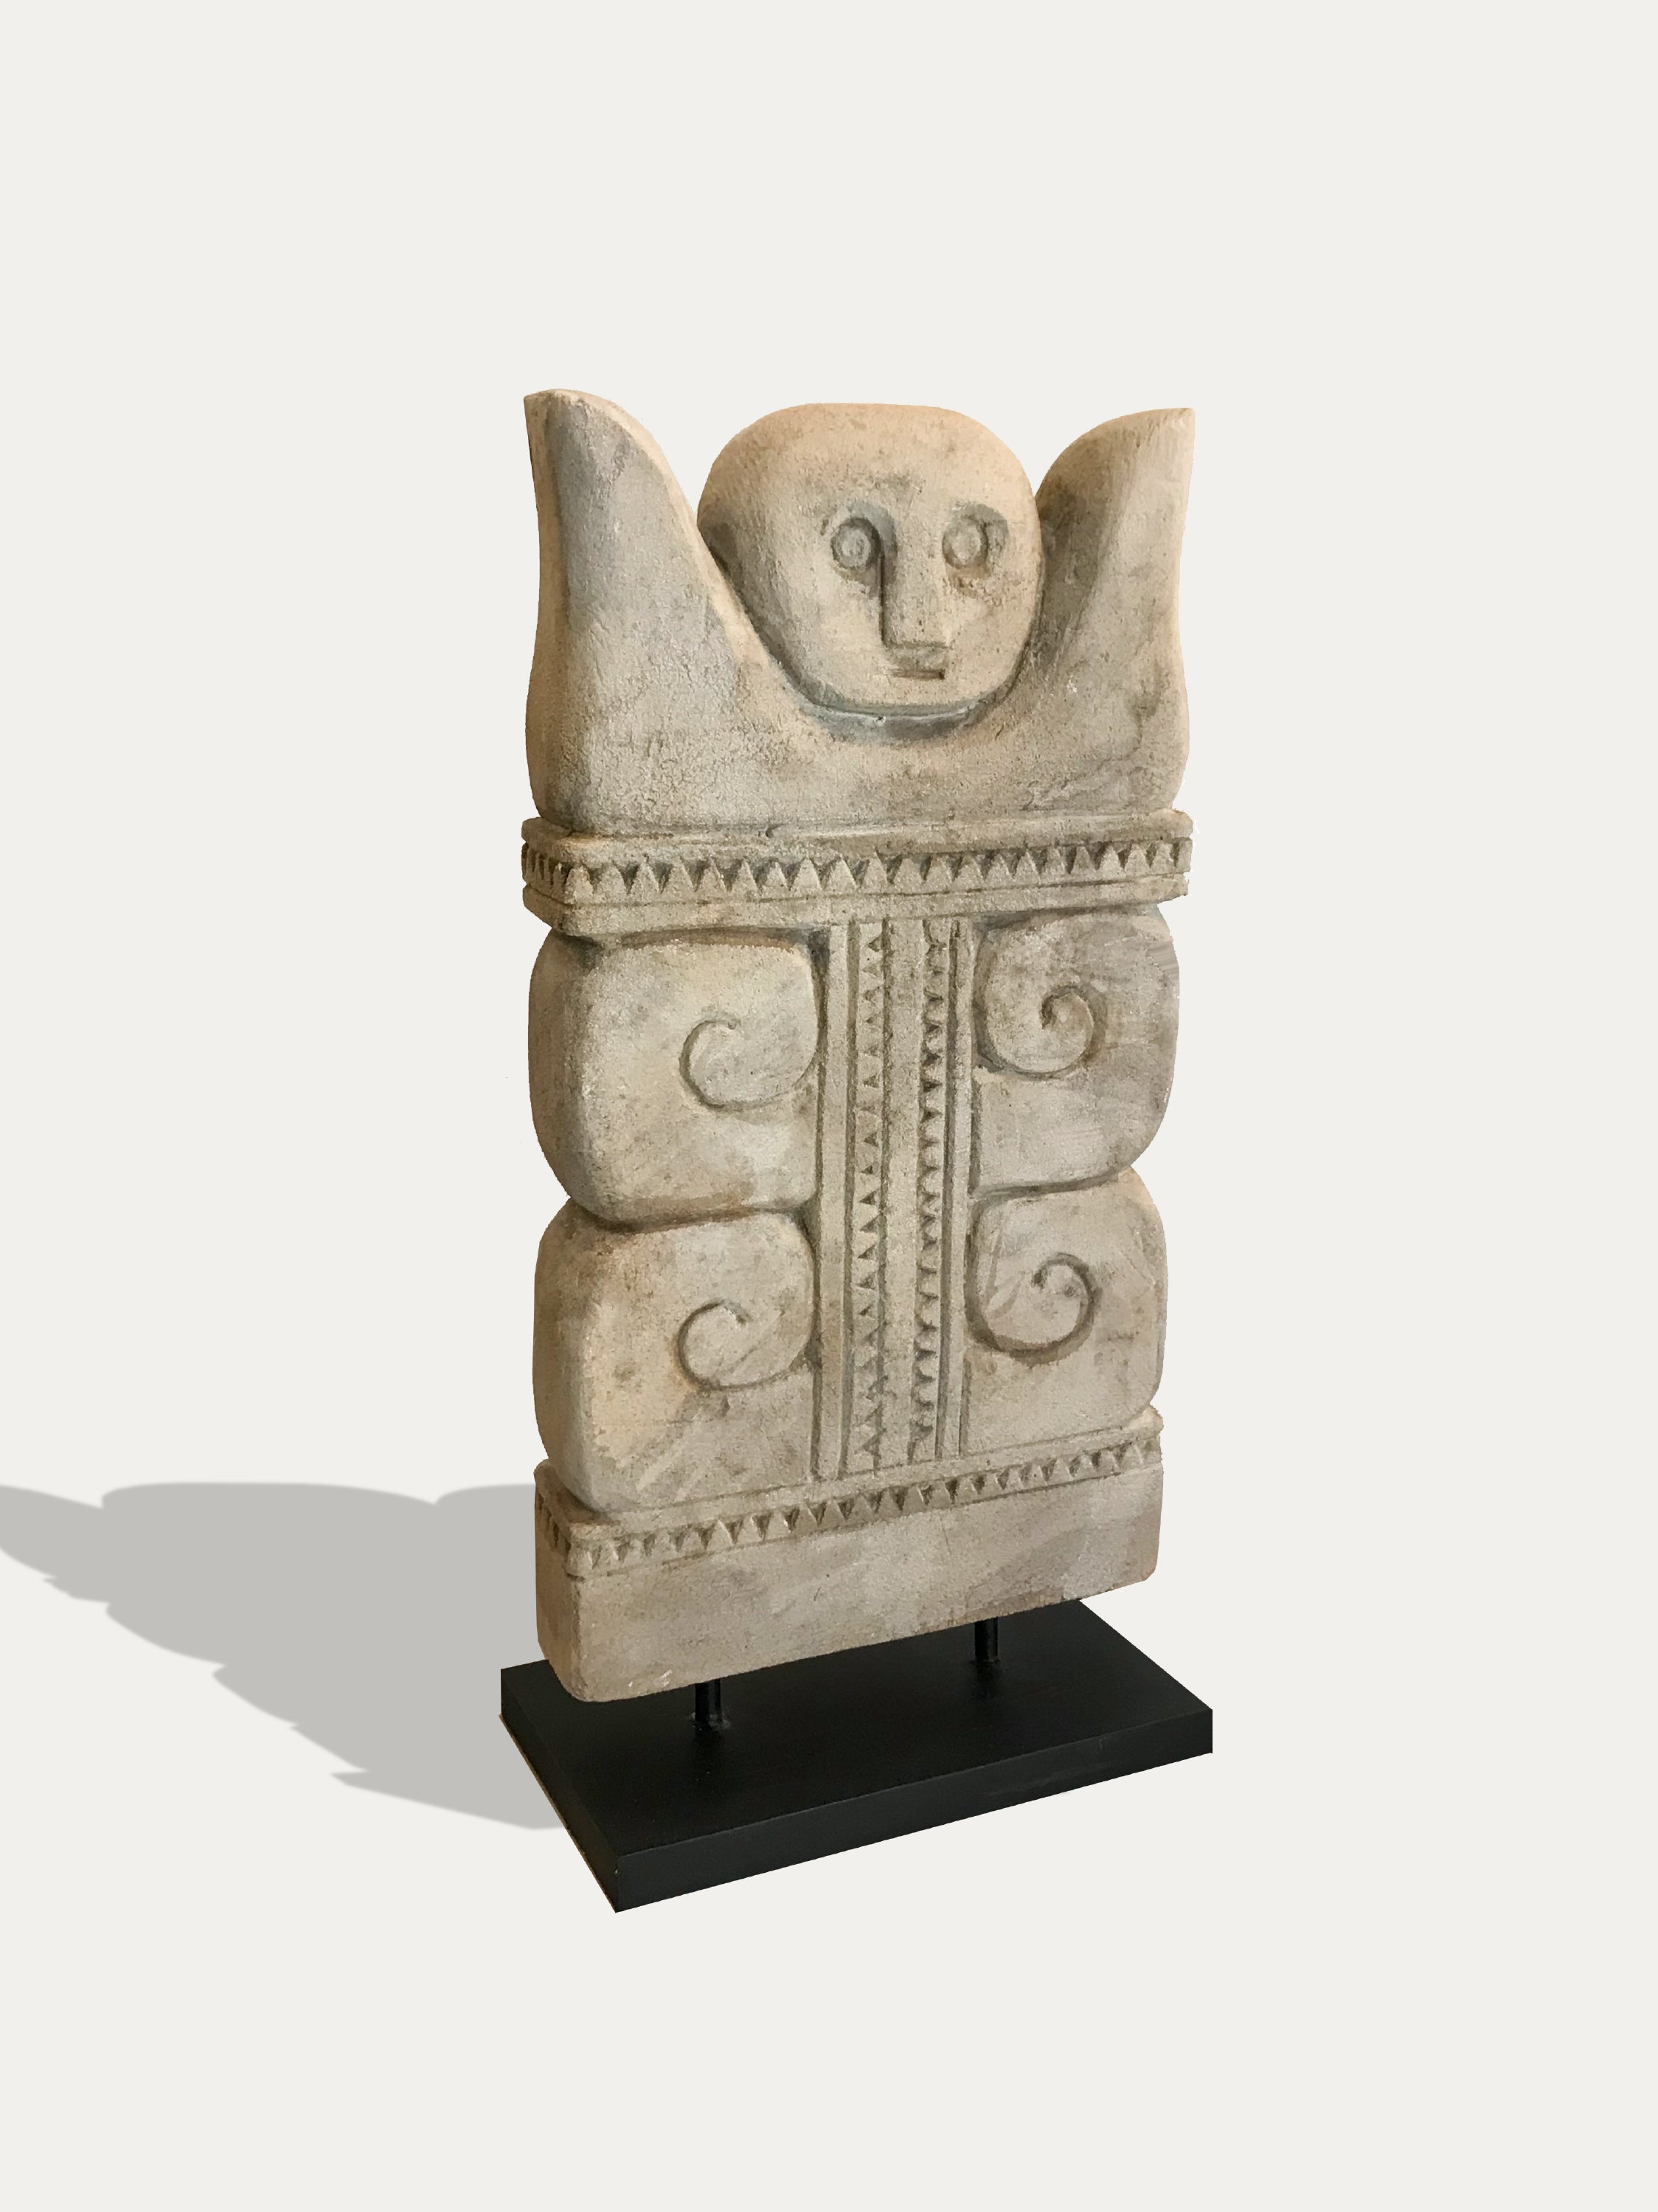 Asian art, A stele stone statue from Sumba in Indonesia from Kirschon.com